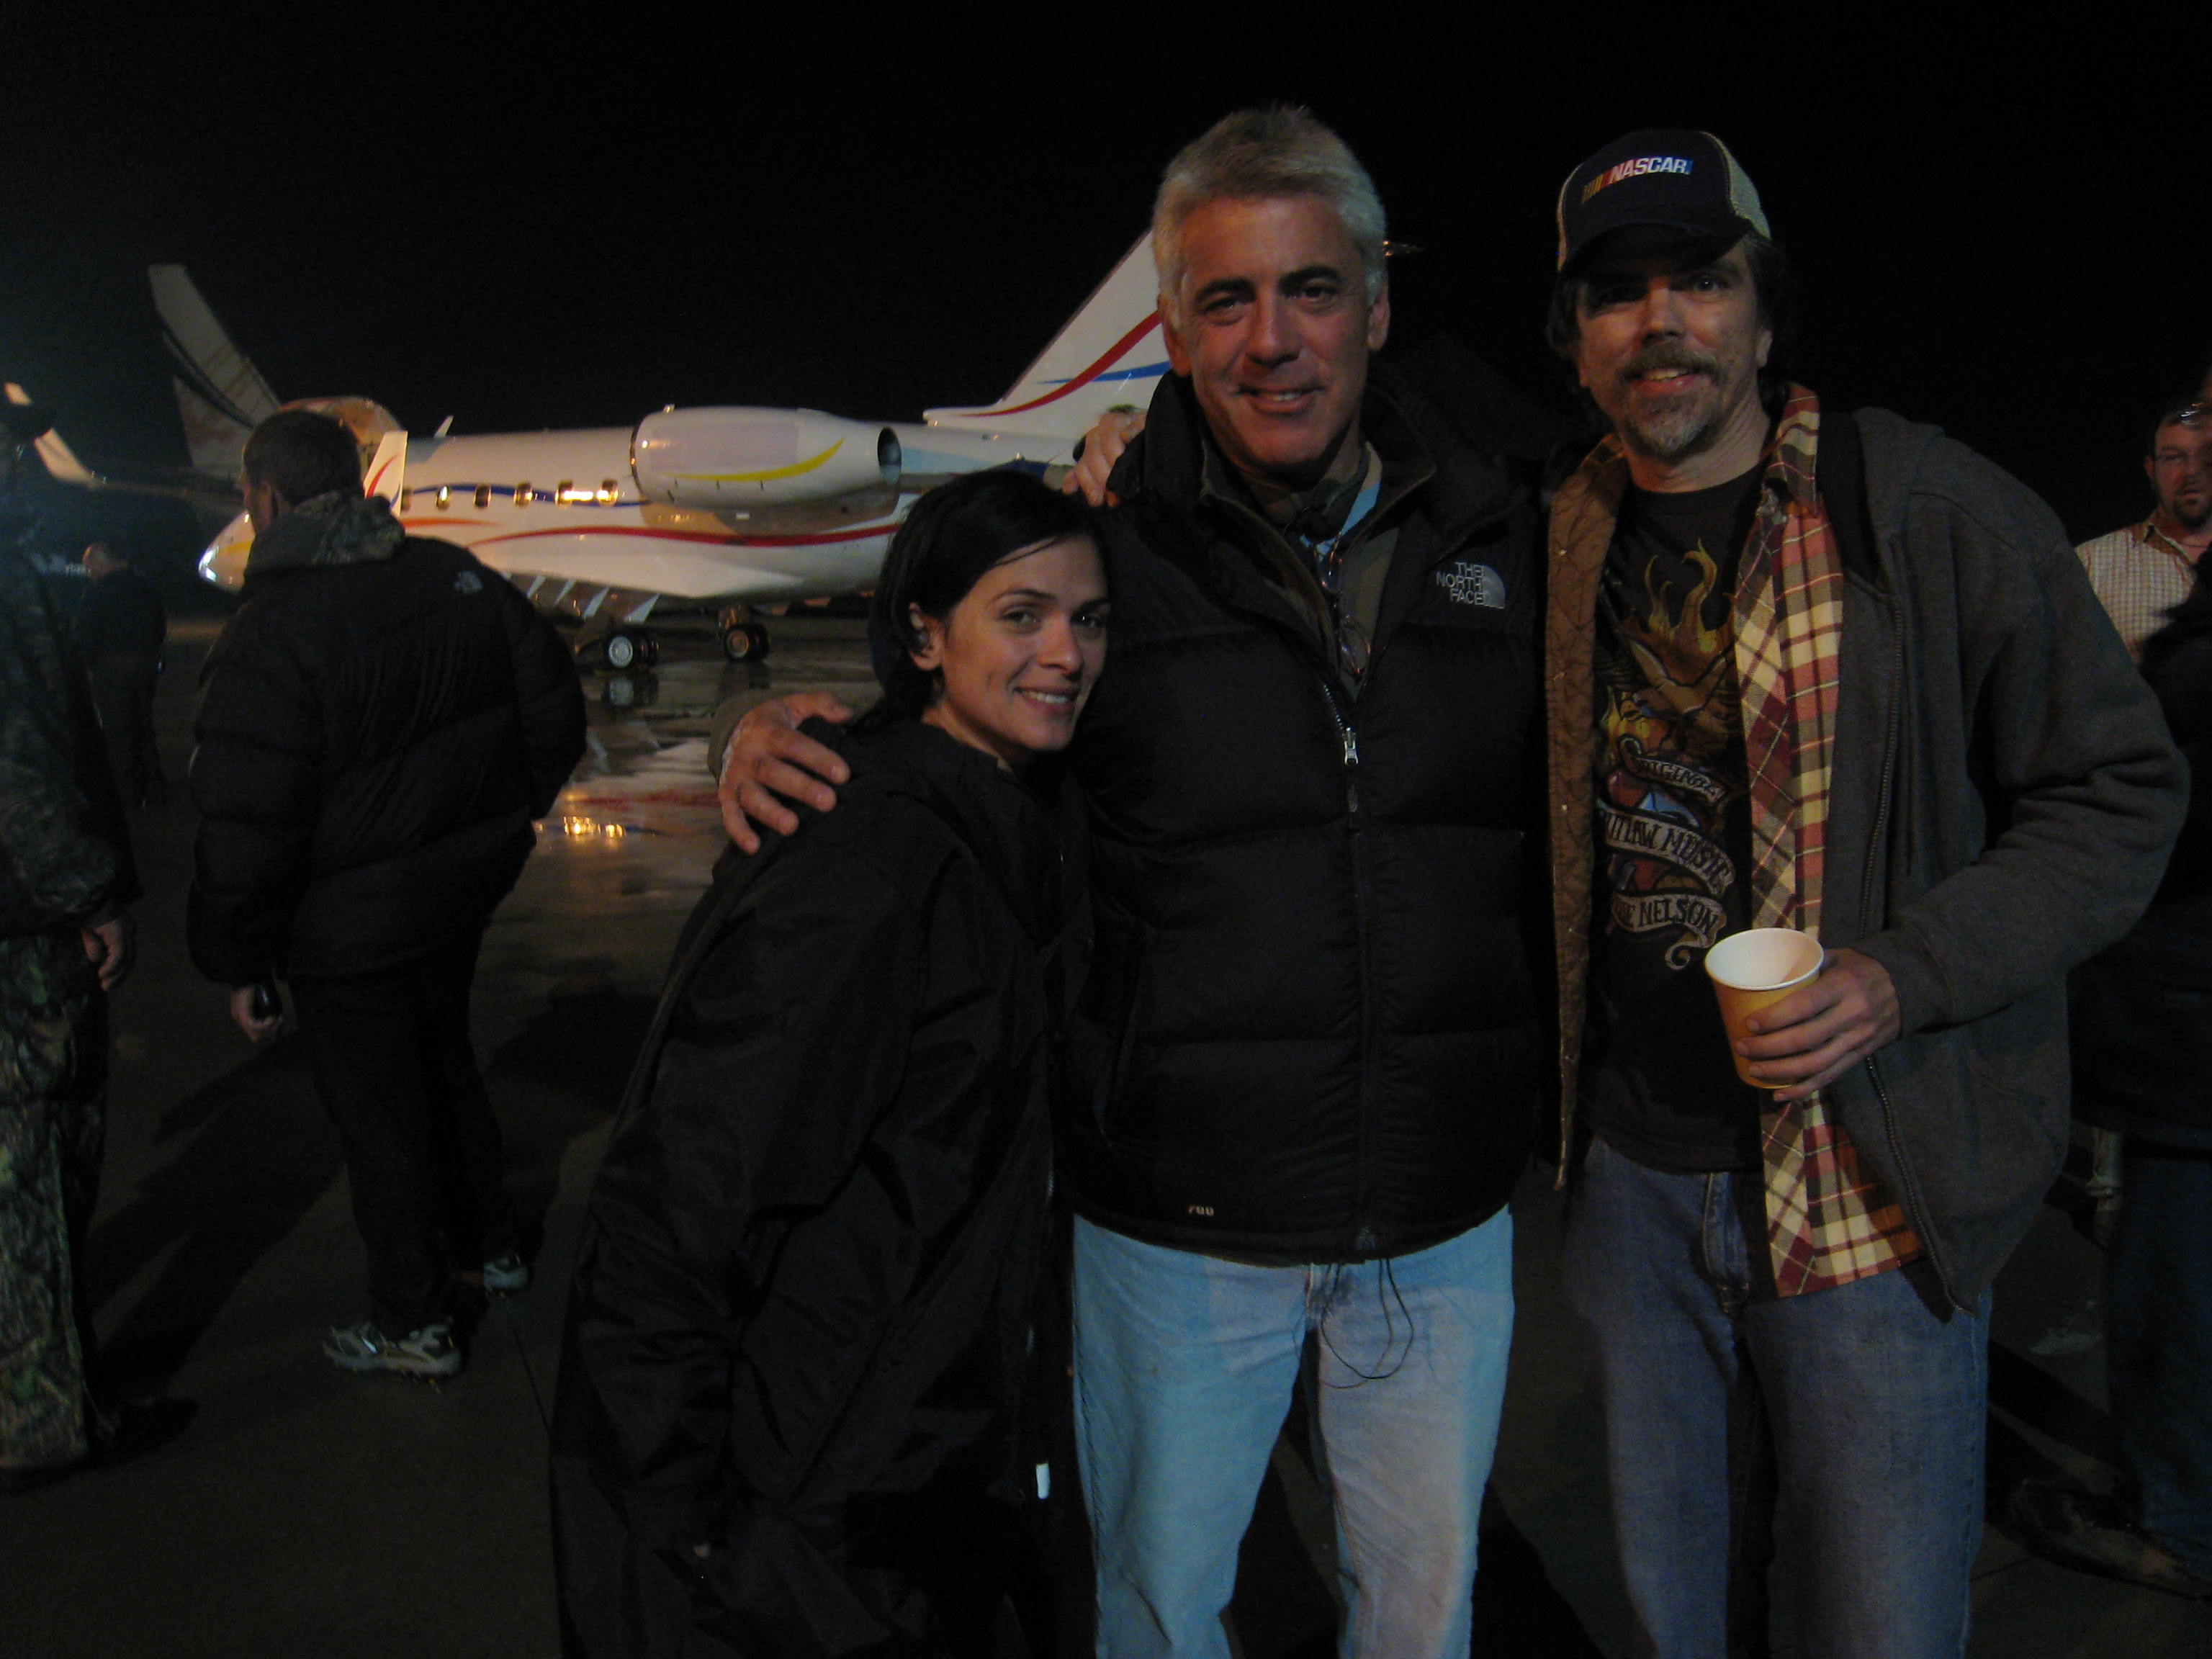 On set of JUSTIFIED with Alex Barreto and director Adam Arkin